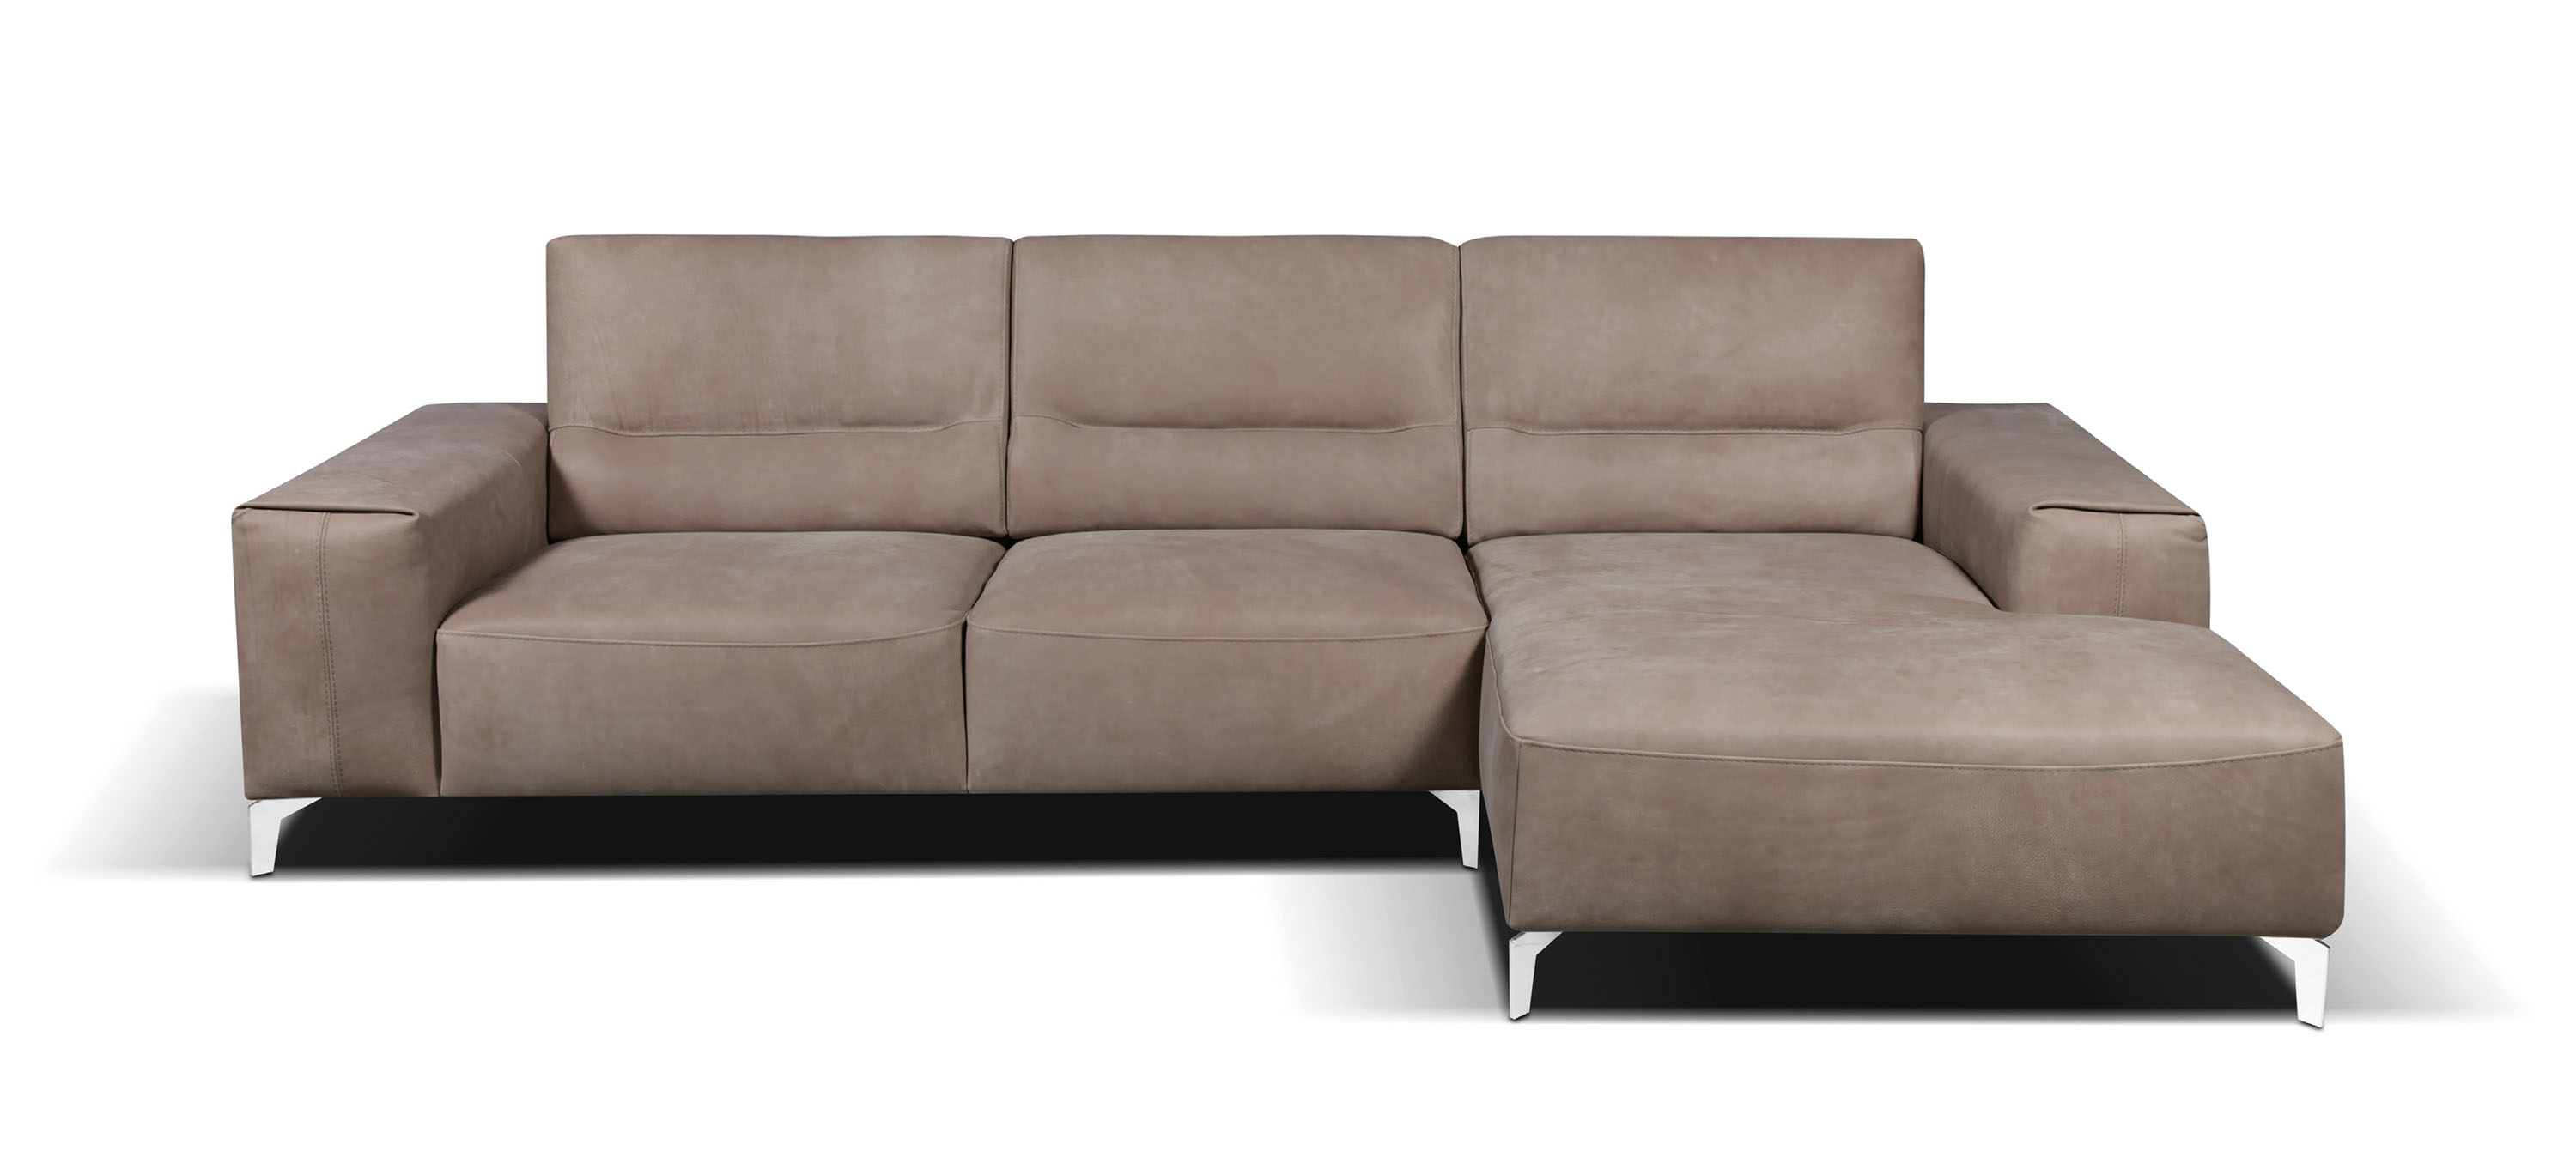 Small Studio Apartment Size Sectional with Optional Leather Chair - Click Image to Close